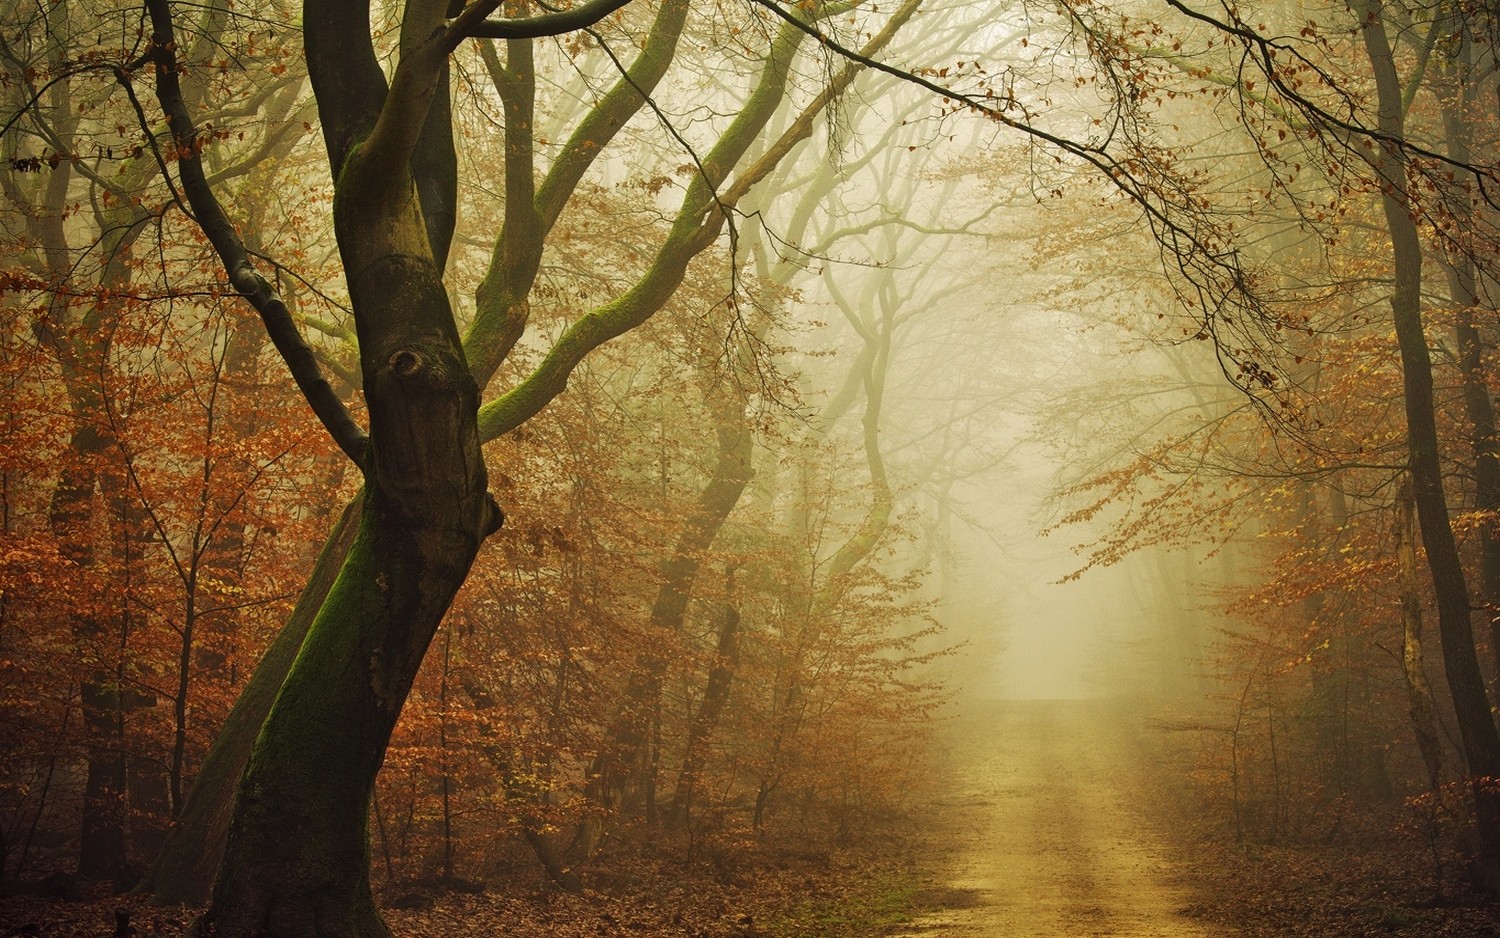 General 1500x938 nature moss forest dirt road fall mist path leaves atmosphere daylight trees morning yellow